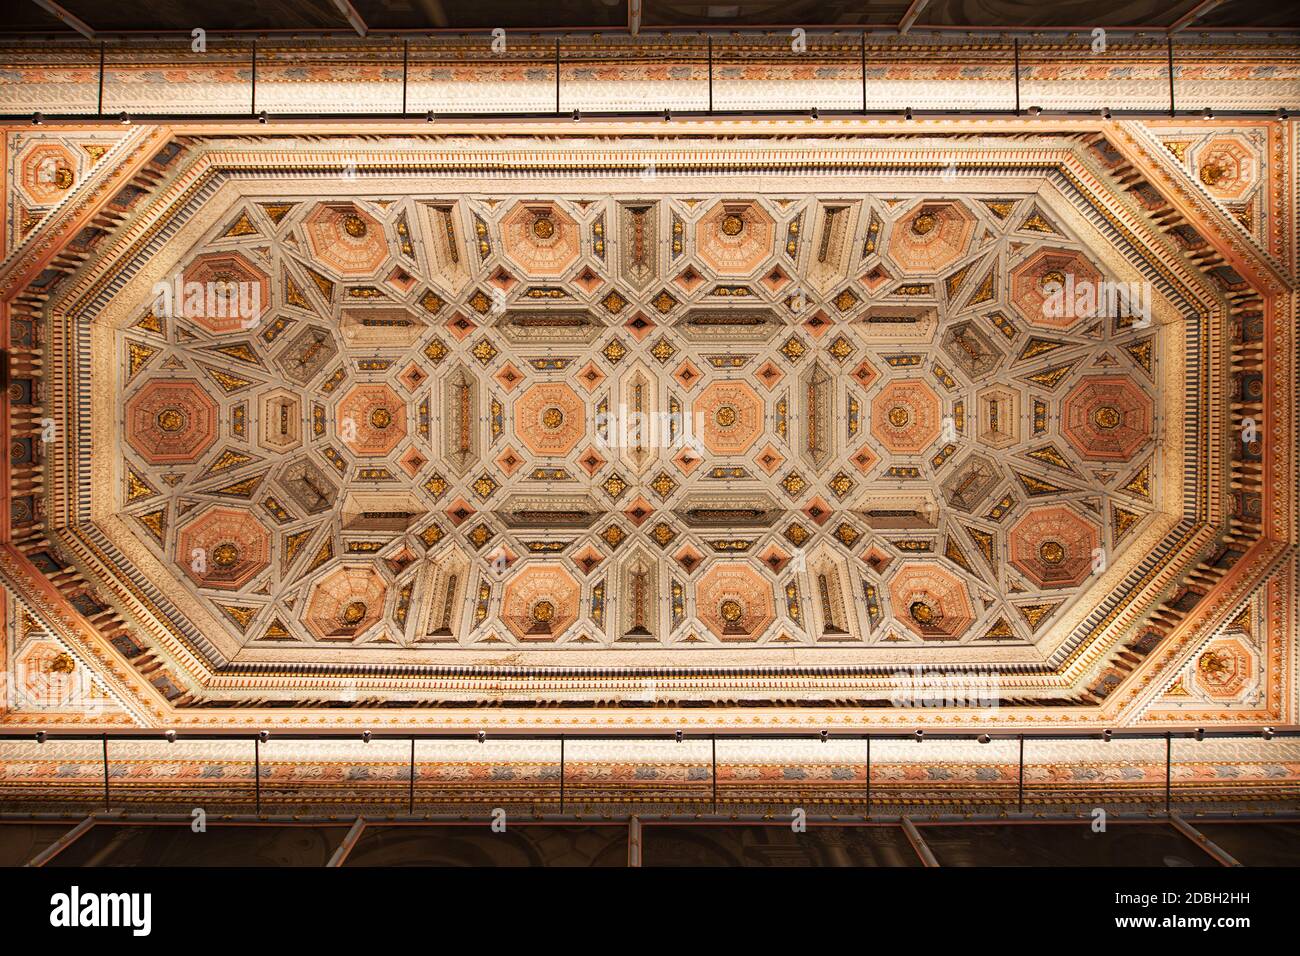 Ceiling of the Chapter Hall in the Cathedral of Santa Maria, Cuenca, Spain. Stock Photo